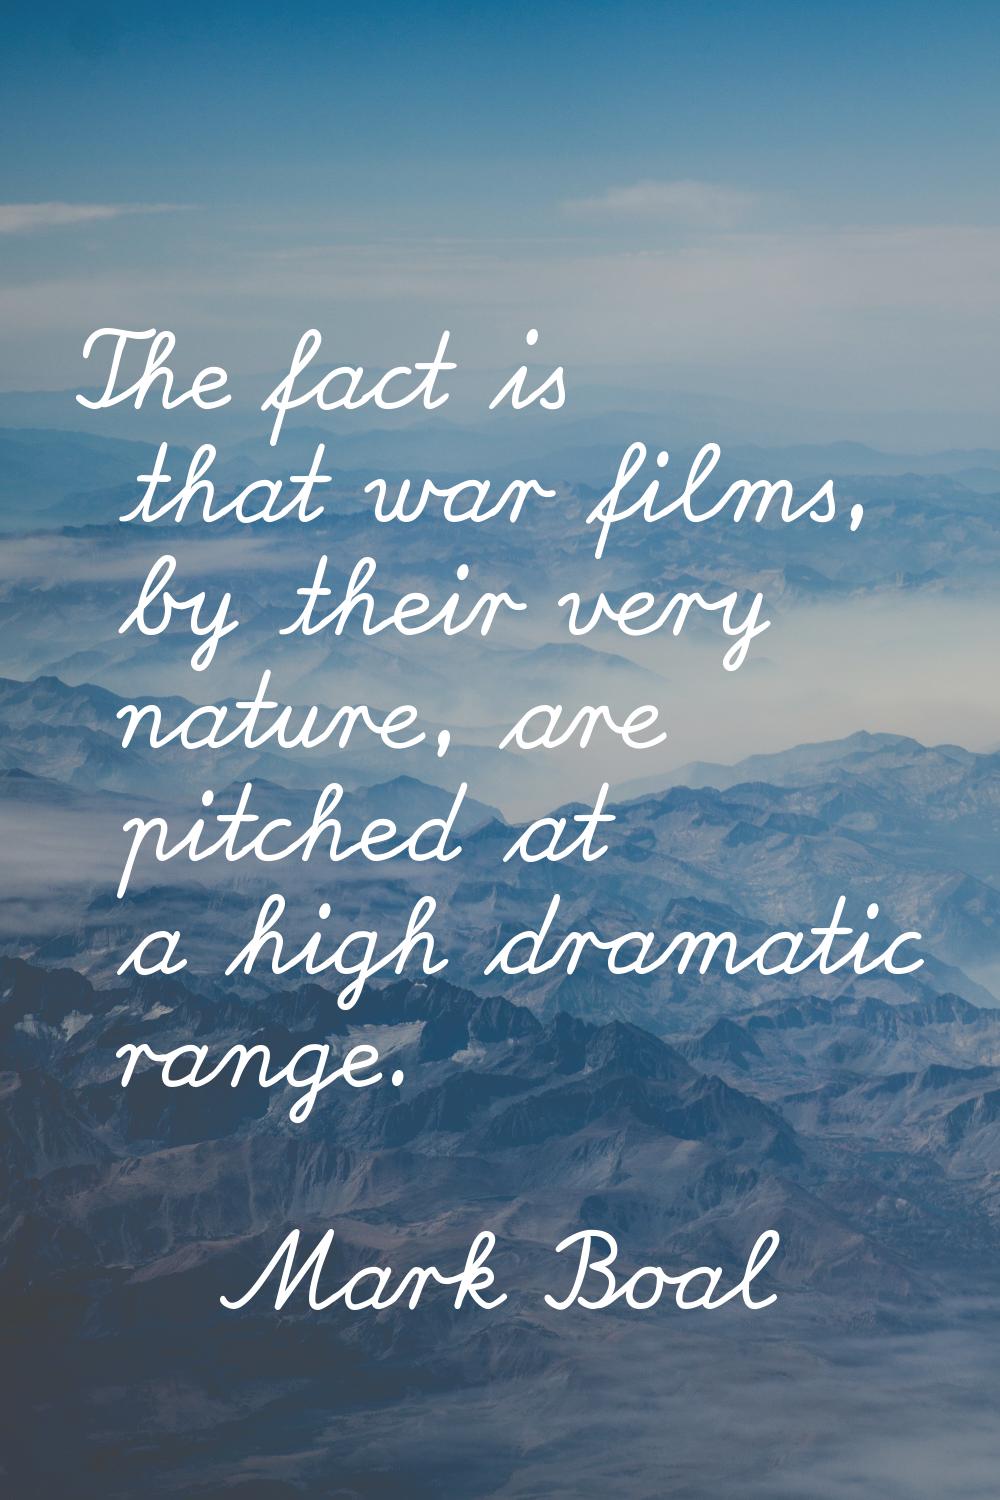 The fact is that war films, by their very nature, are pitched at a high dramatic range.